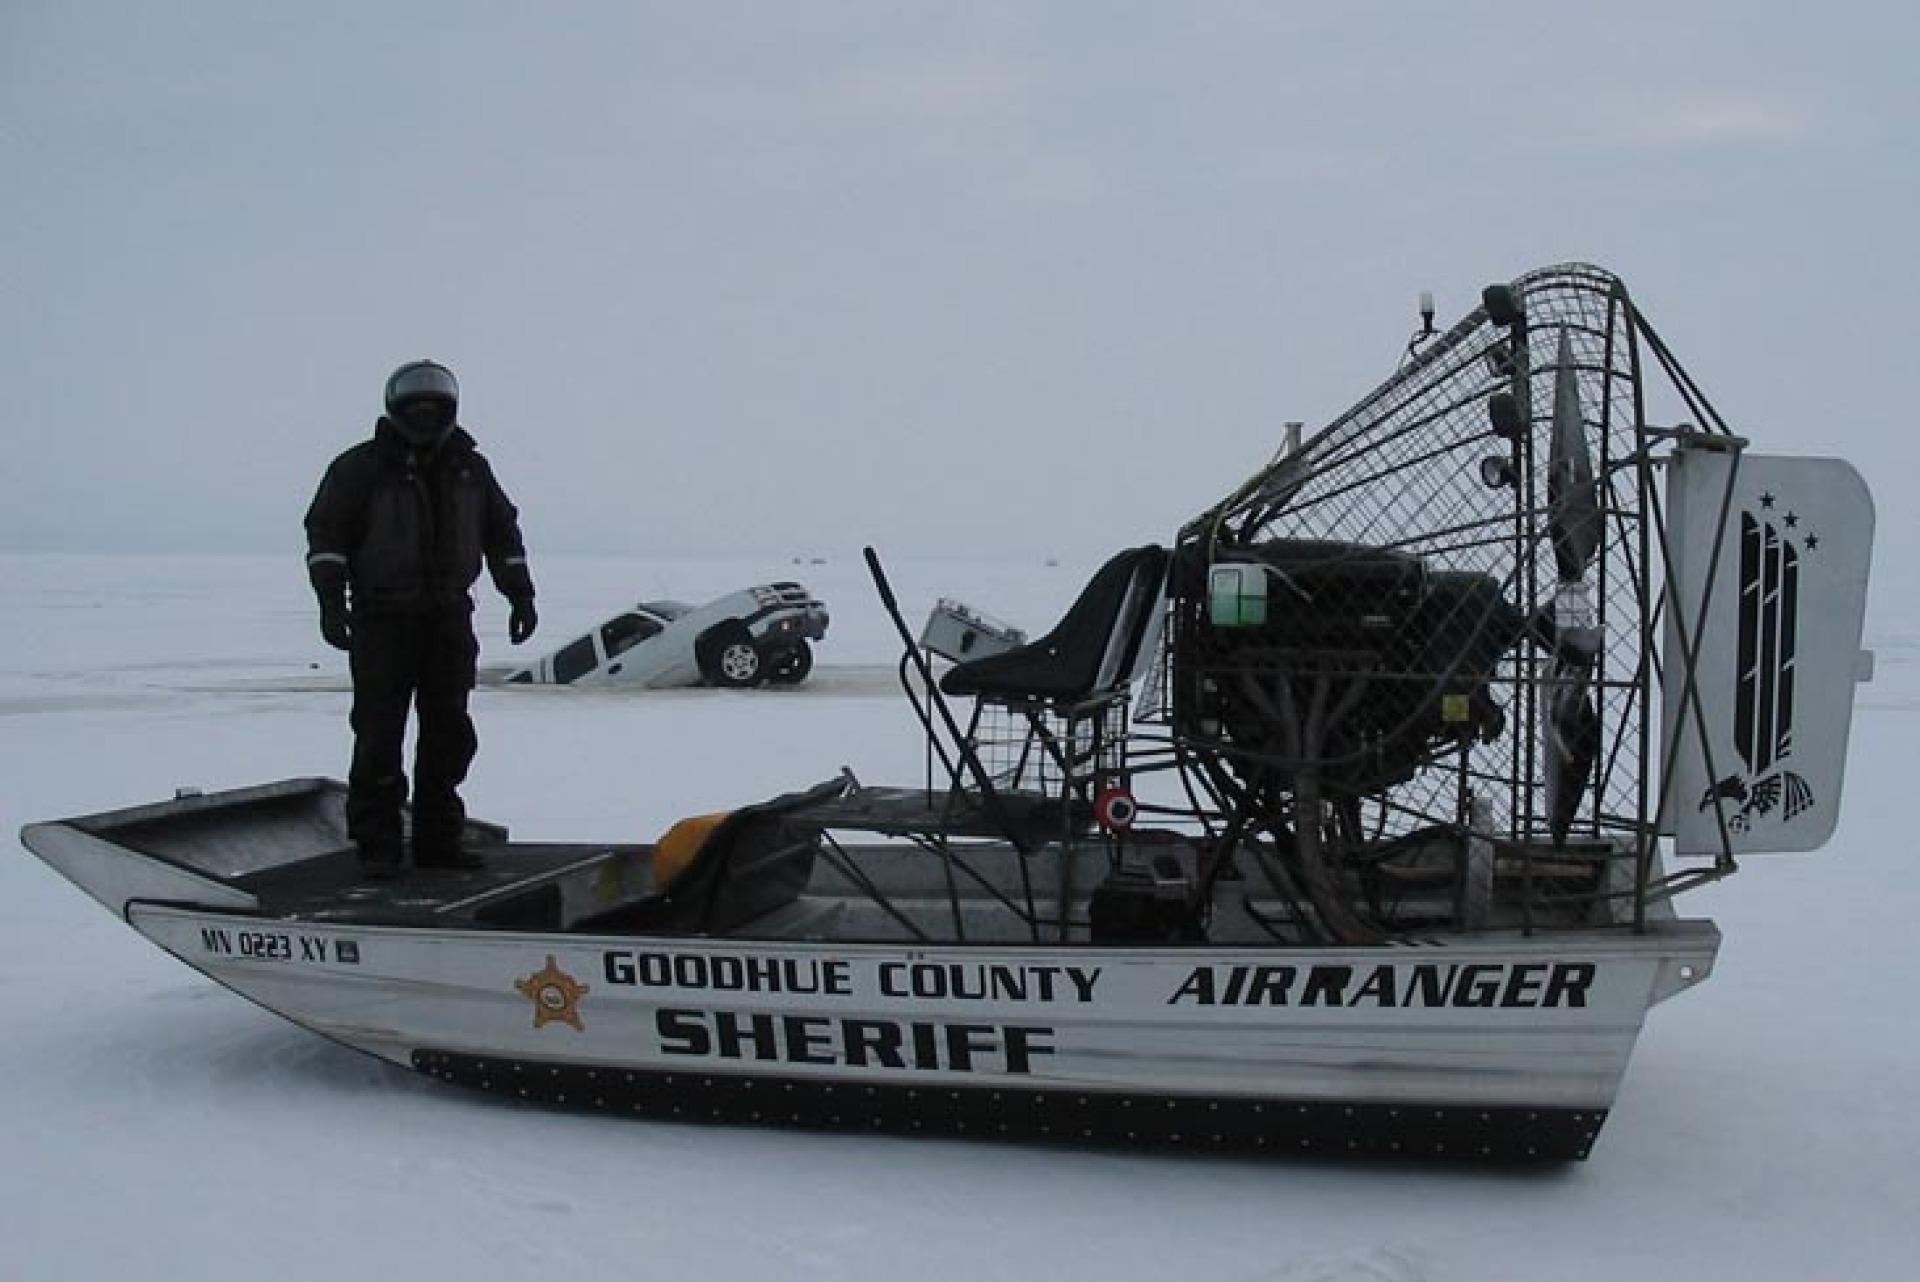 A Goodhue County officer posing on their winter patrol vehicle positioned on the frozen lake.